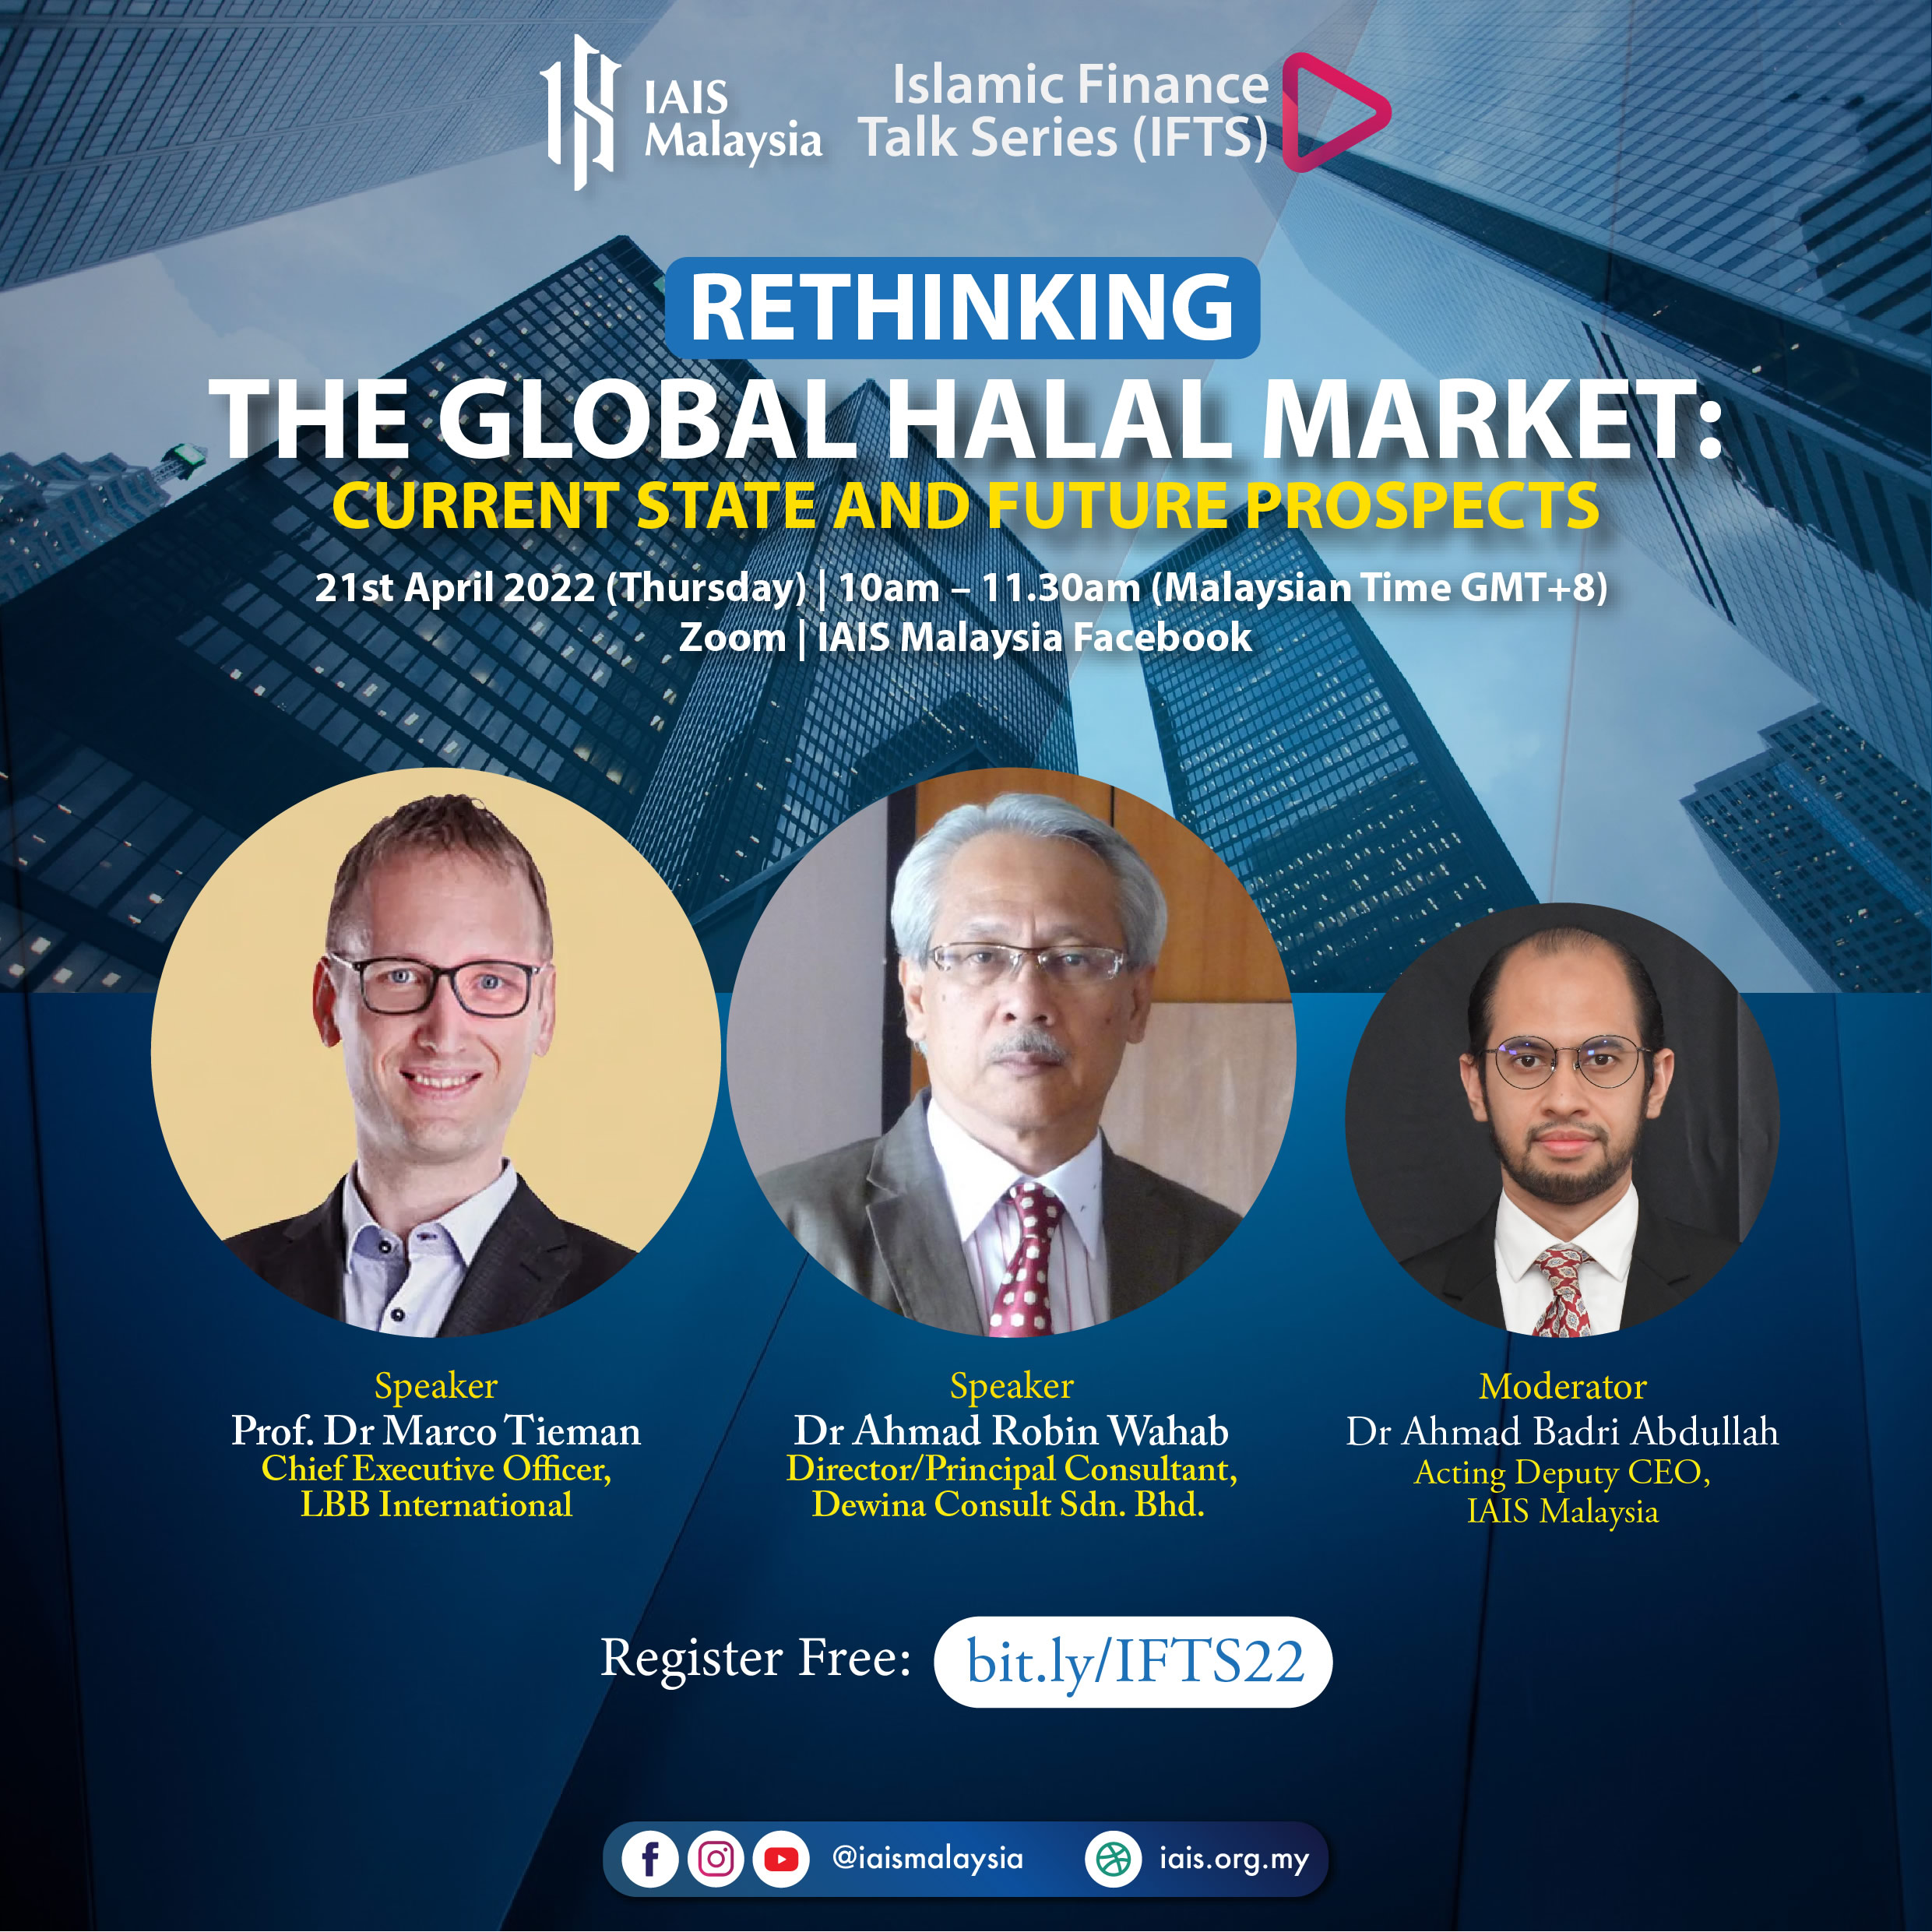 Islamic Finance Talk Series (IFTS) “Rethinking the Global Halal Market: Current State and Future Prospects”